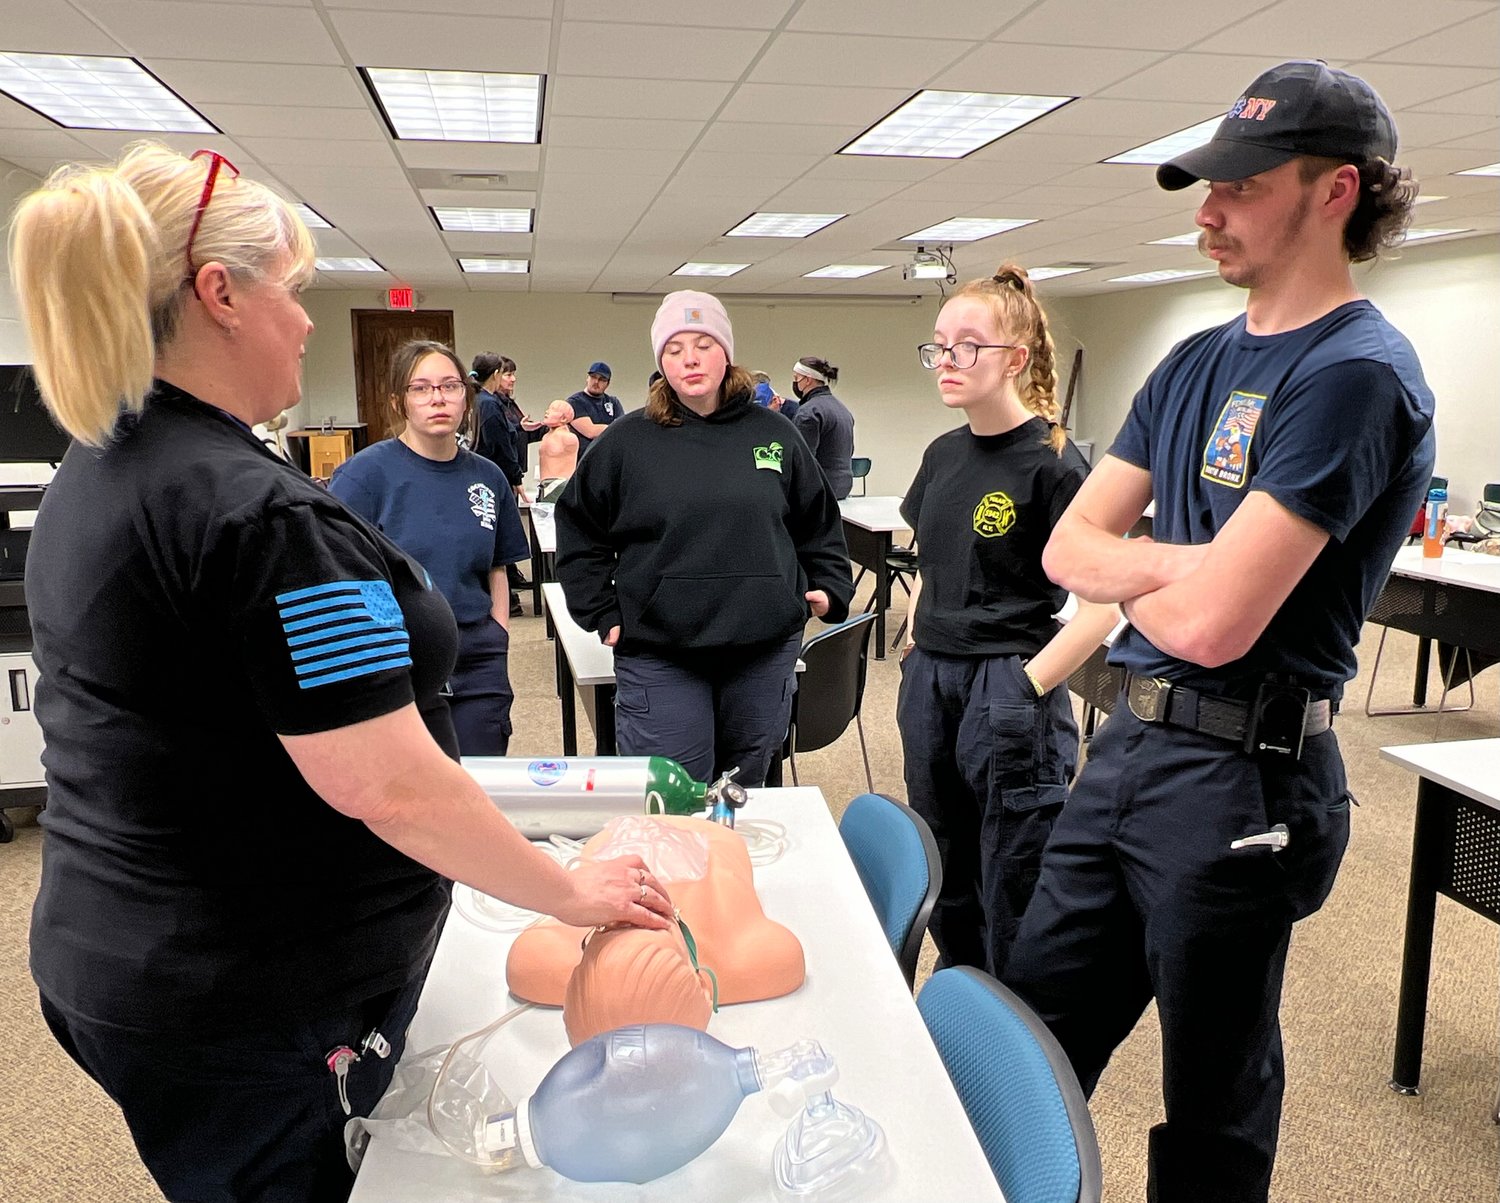 SUNY Sullivan is offering an emergency medical technician (EMT) refresher class and an EMT basic course. Classes start soon, so register now.